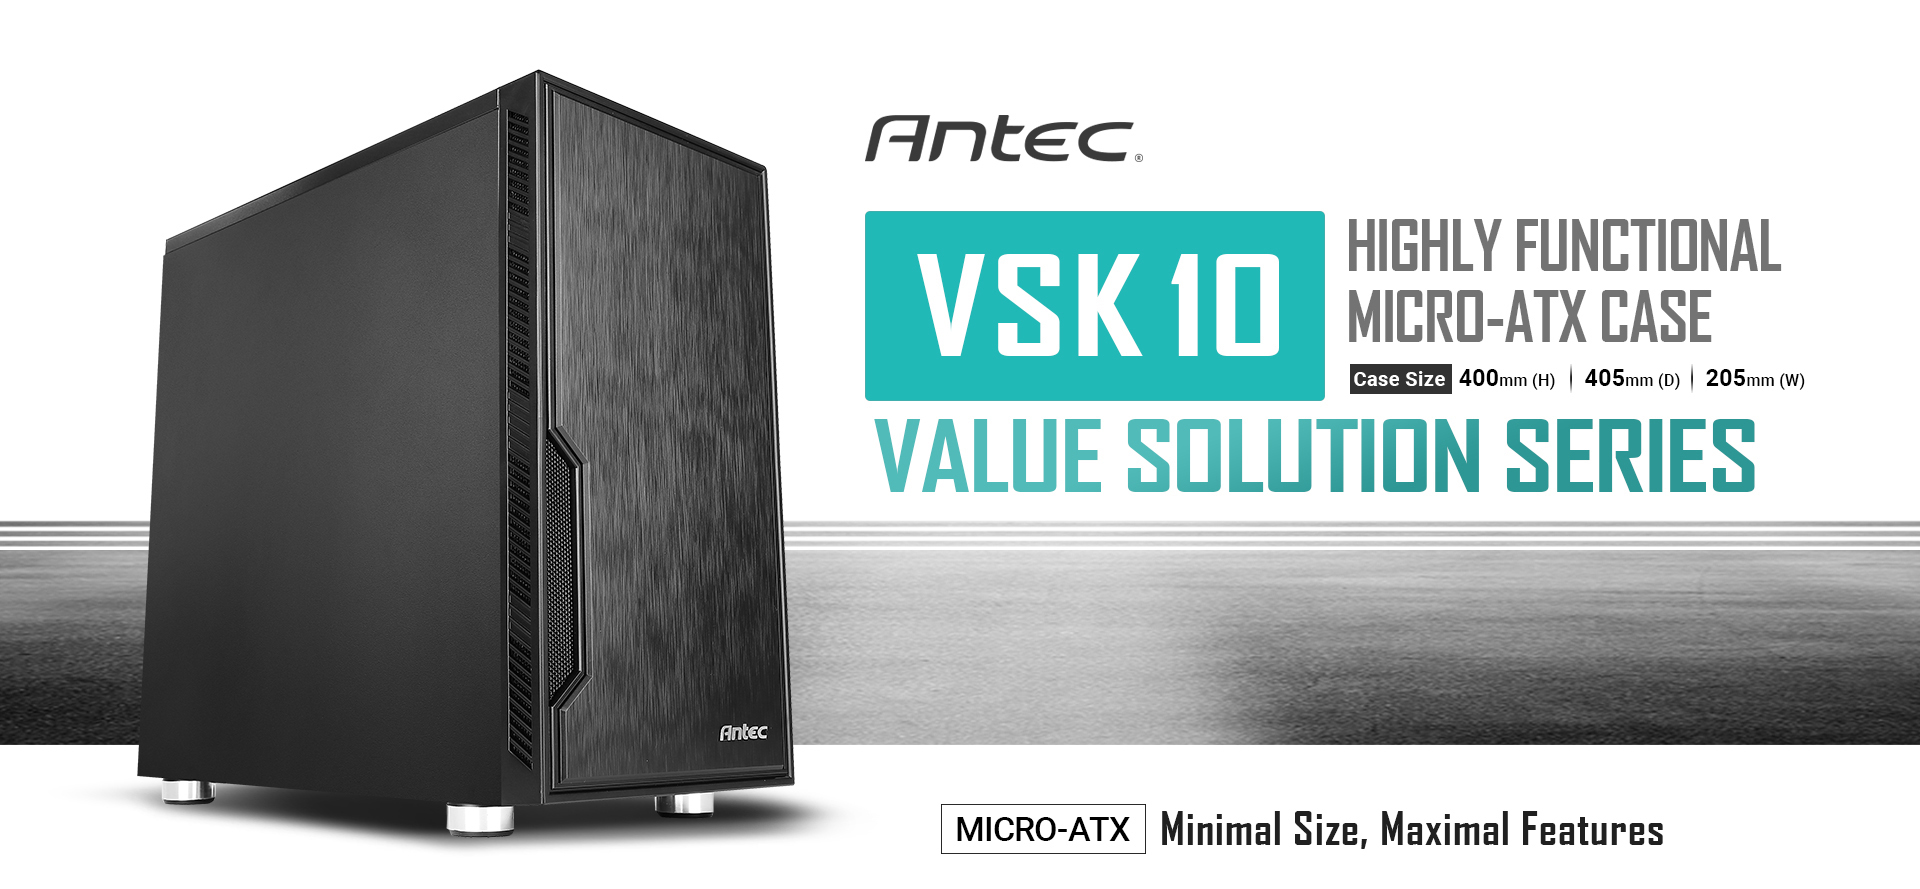 Antec Banner showing the VSK 10 Angled Up to the Right. There is text that reads: HIGHLY FUNCTIONAL MICRO-ATX CASE - Case Size 400mm height, 405mm depth and 205mm width. VALUE SOLUTION SERIES - MICRO-ATX Minimal Size, Maximal Features